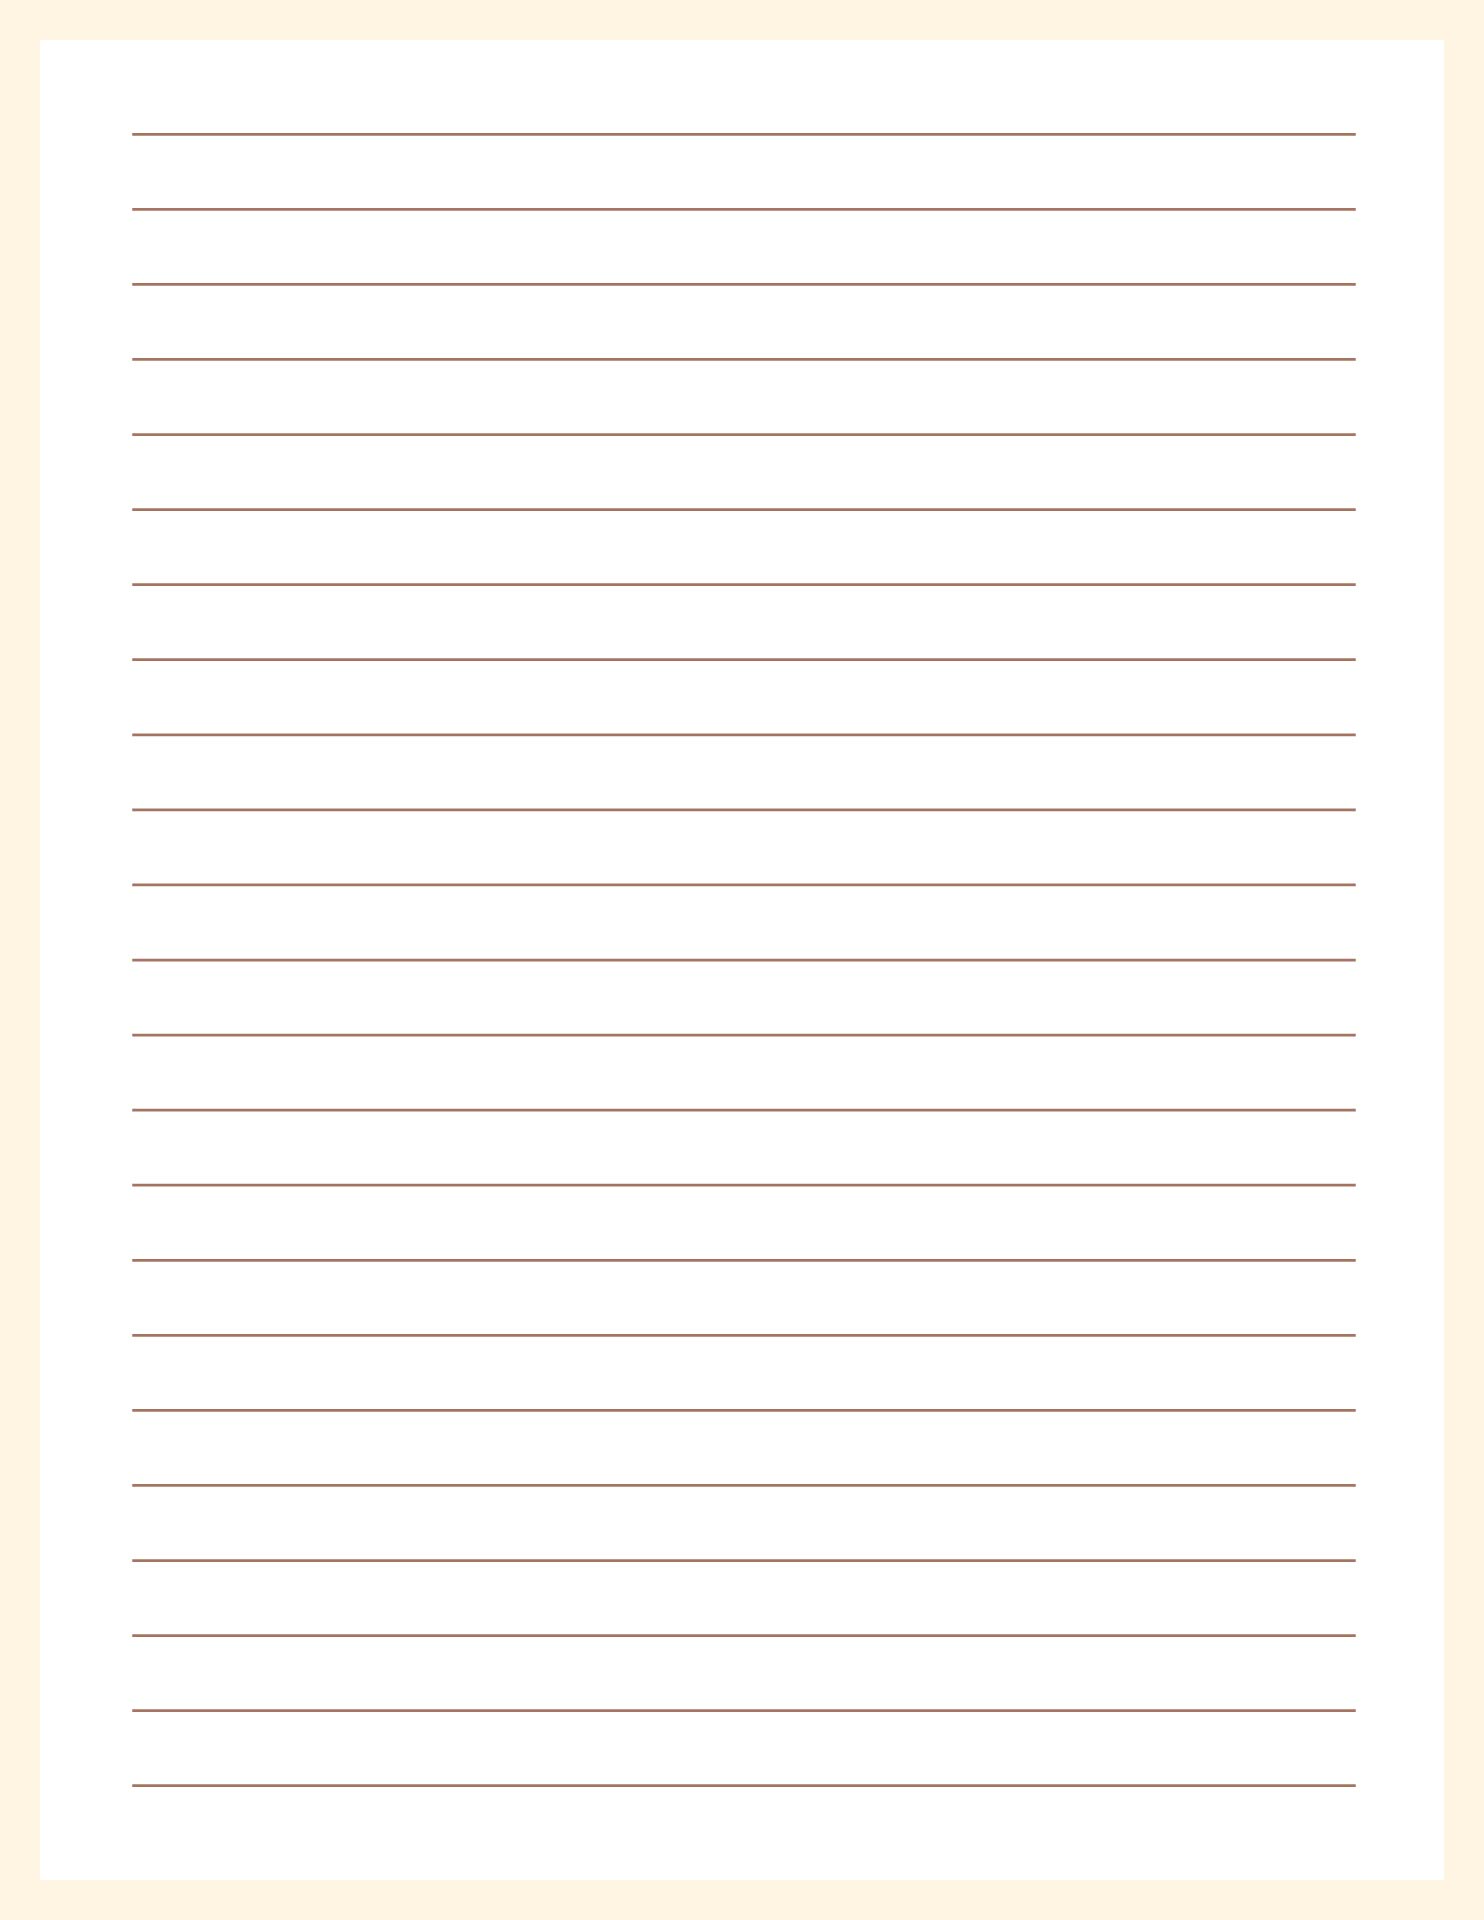 free-printable-paper-with-lines-for-writing-get-what-you-need-for-free